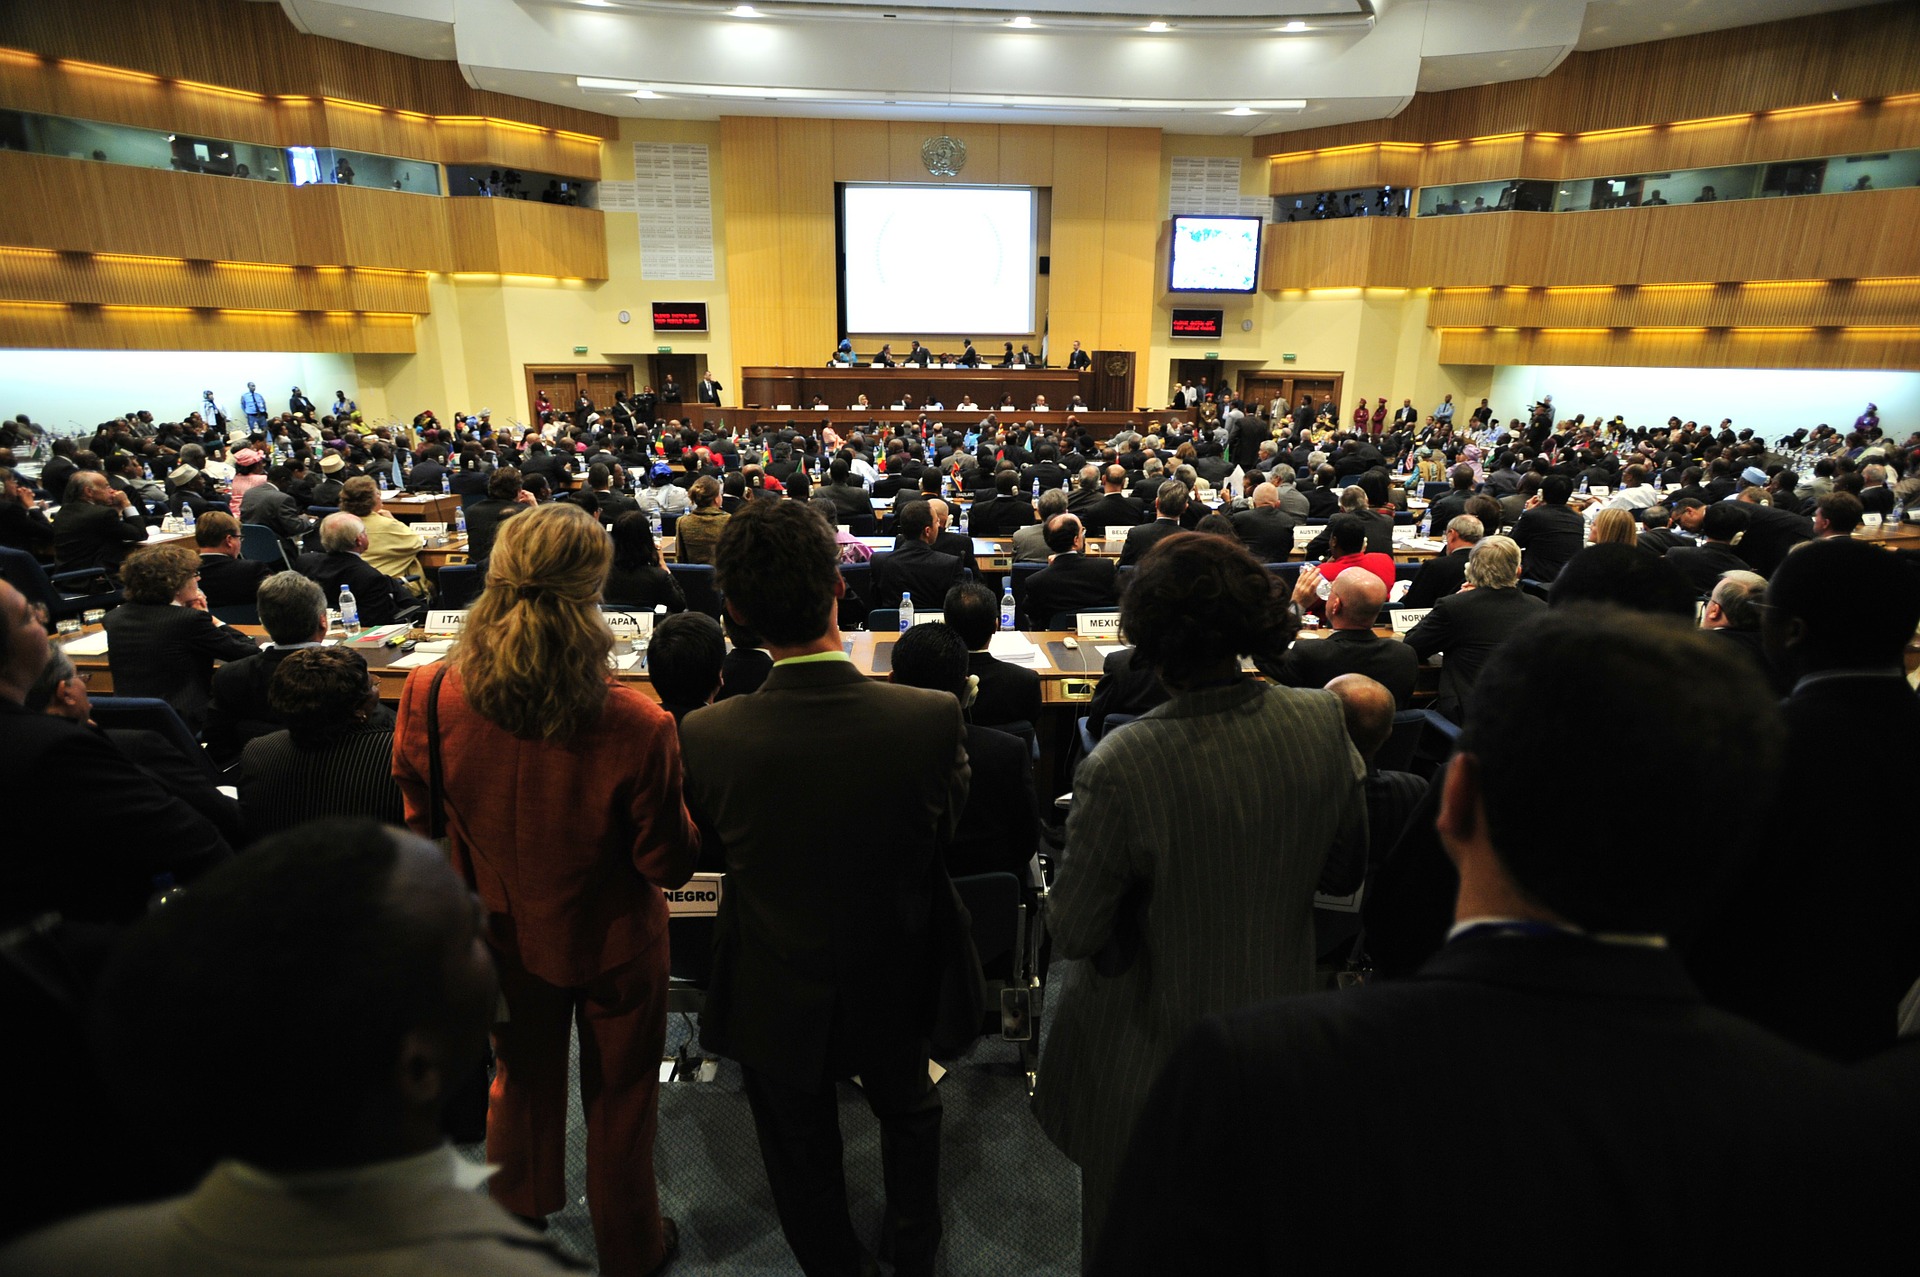 A crowded government conference takes place in an assembly hall equipped with ASI Architectural acoustic wooden panels and ceiling tiles.